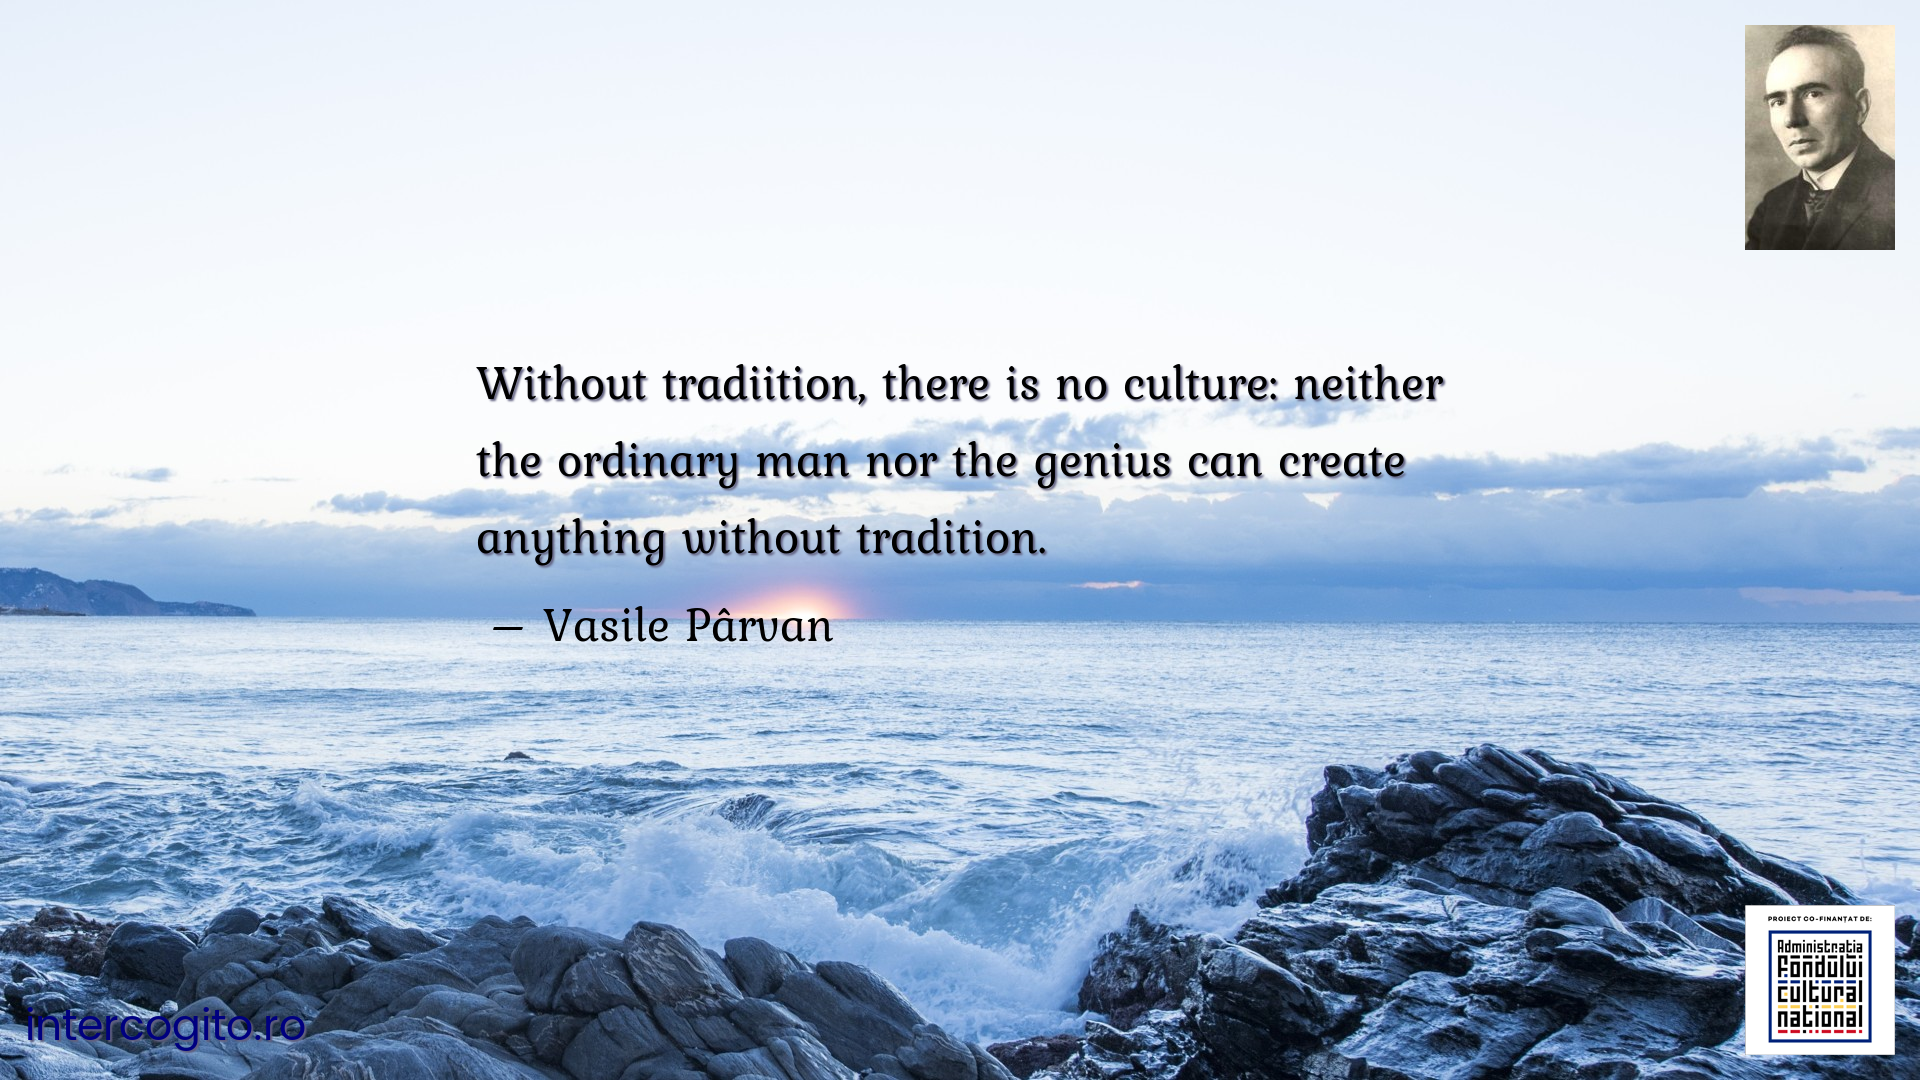 Without tradiition, there is no culture: neither the ordinary man nor the genius can create anything without tradition.